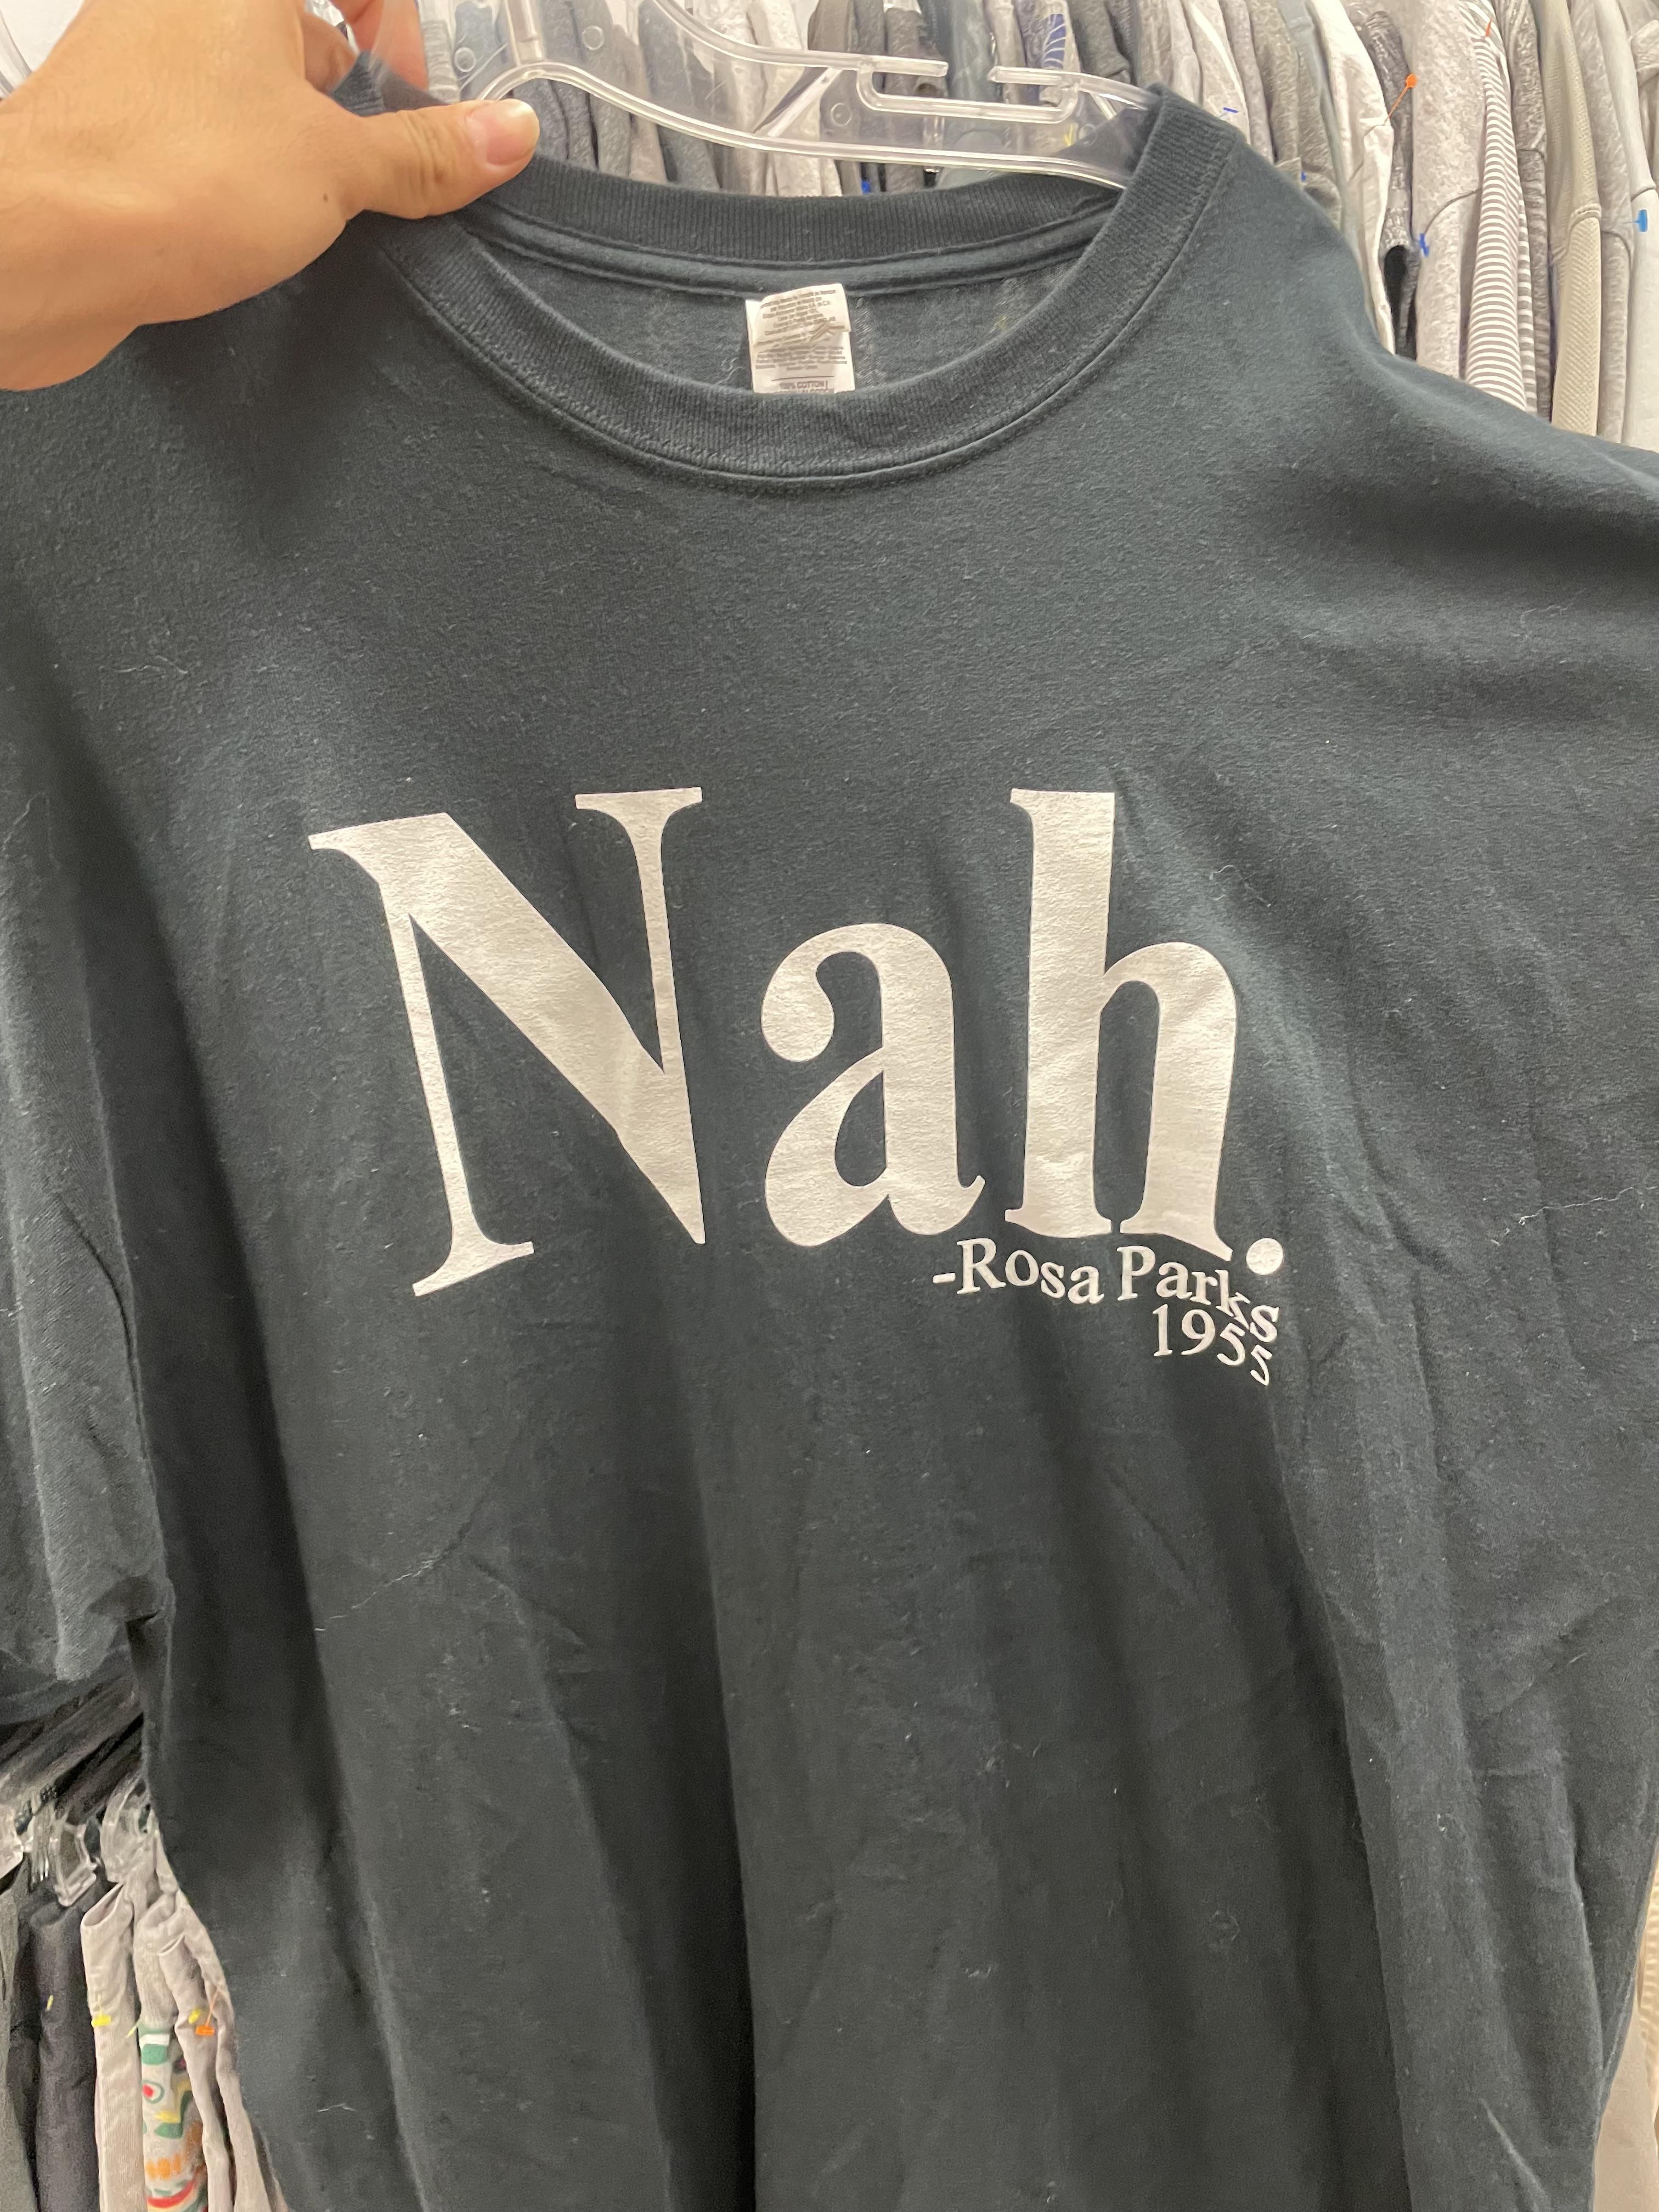 found at my local goodwill